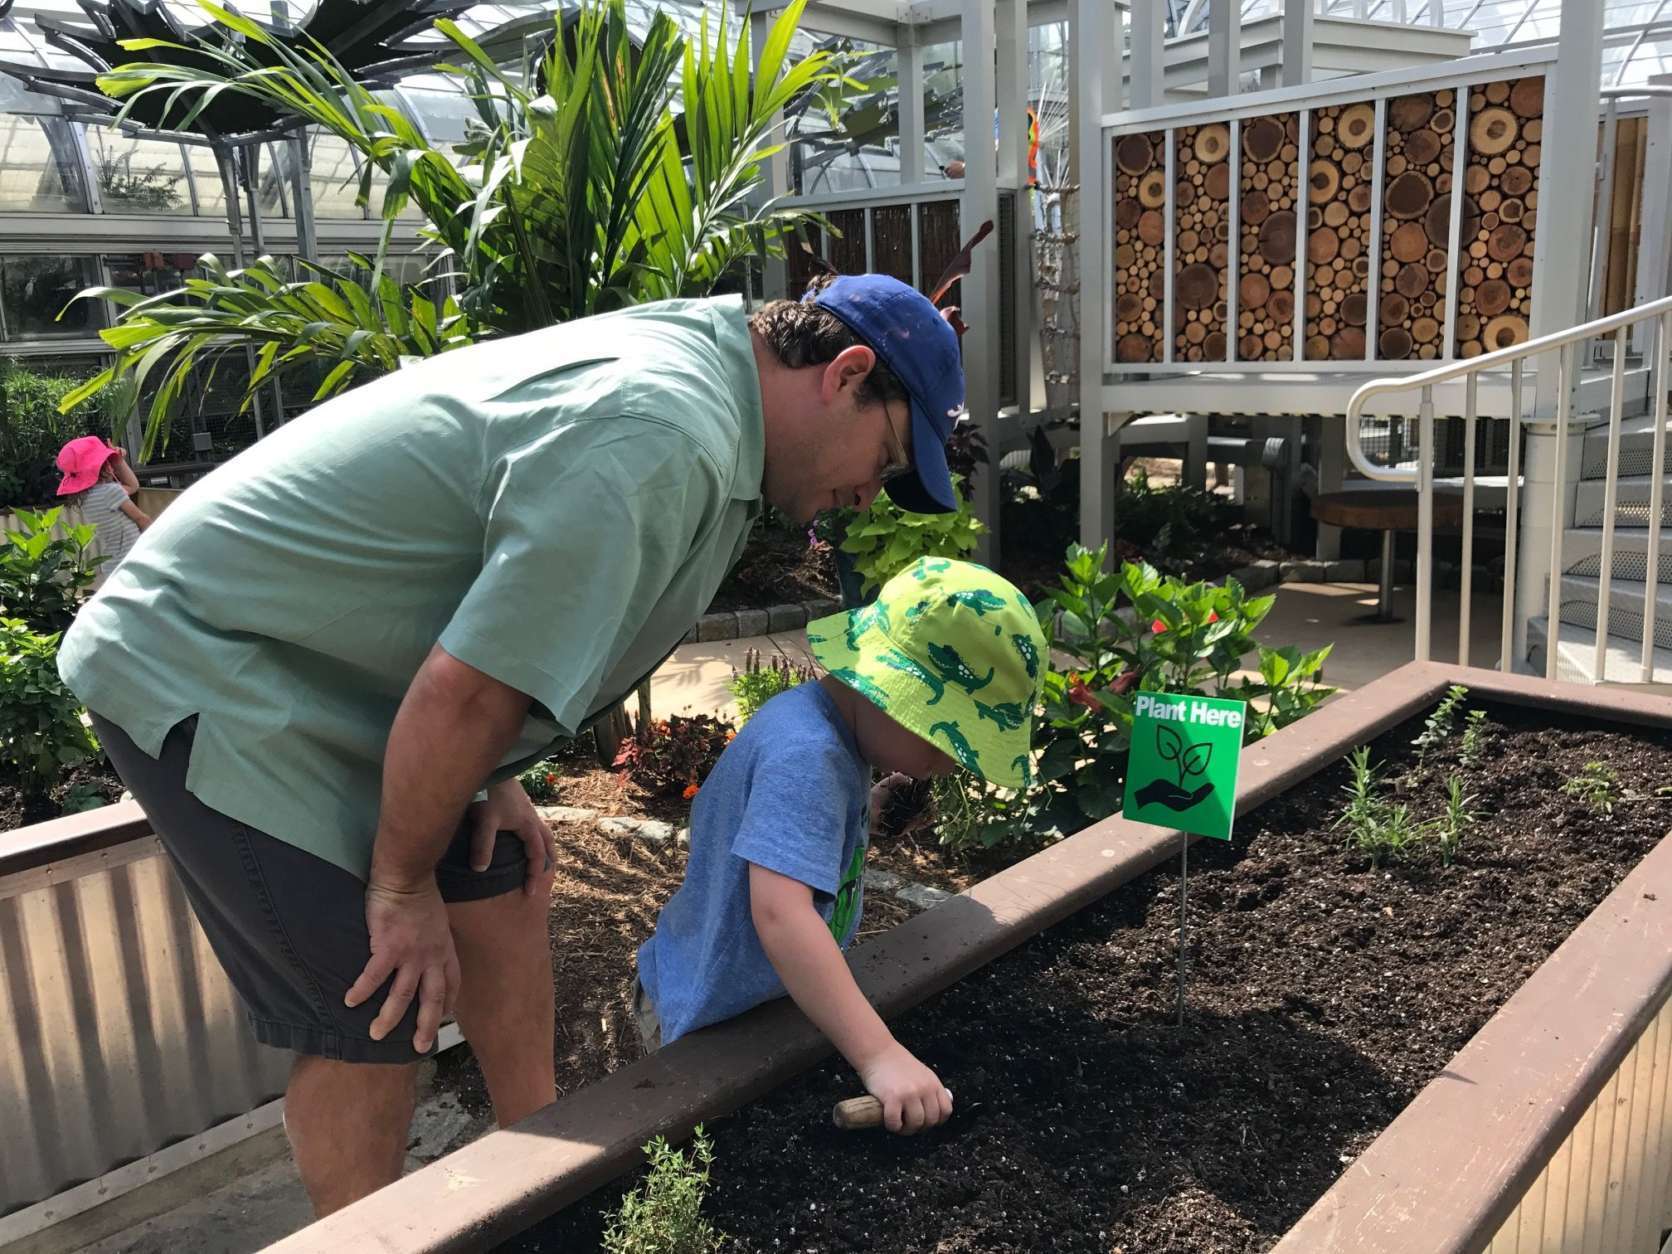 After an eight-month renovation, the children’s garden at the U.S. Botanic Garden is now open to the public. The newly refreshed space includes a climbing structure, a children’s-sized digging area, a kiwifruit tunnel and a plant-your-own garden station. (WTOP/Rachel Nania) 